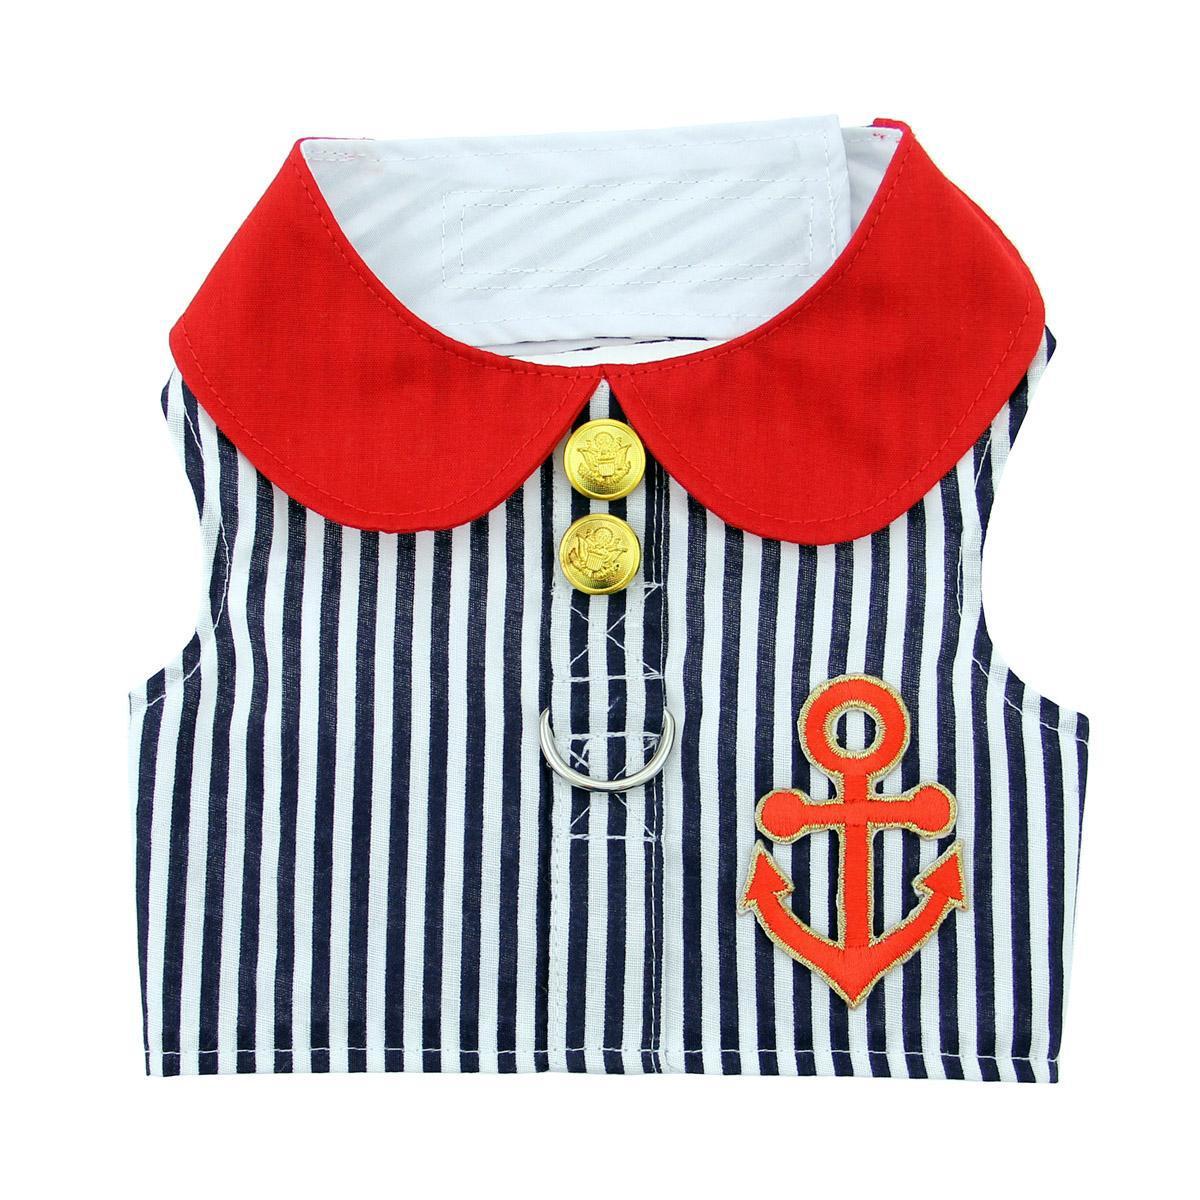 Sailor Boy Dog Tank by Dogo - Red - X-Small